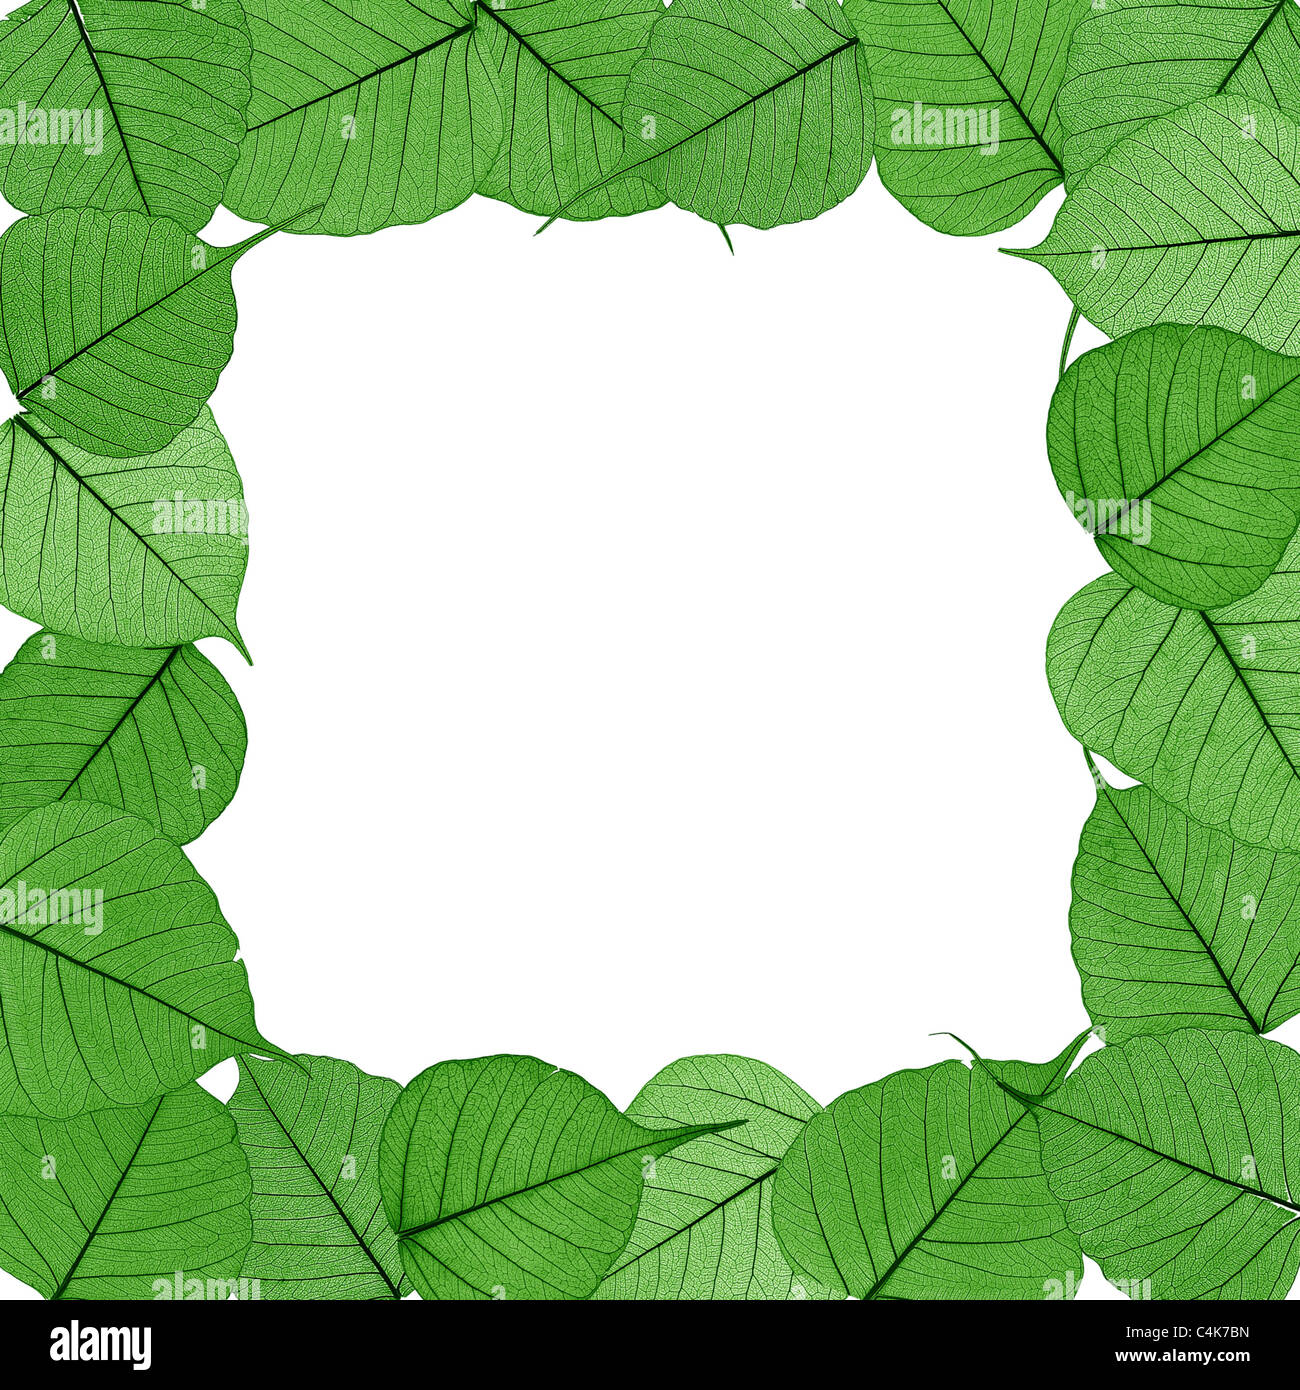 Green skeletal leaves on white background - square frame - isolated. Stock Photo